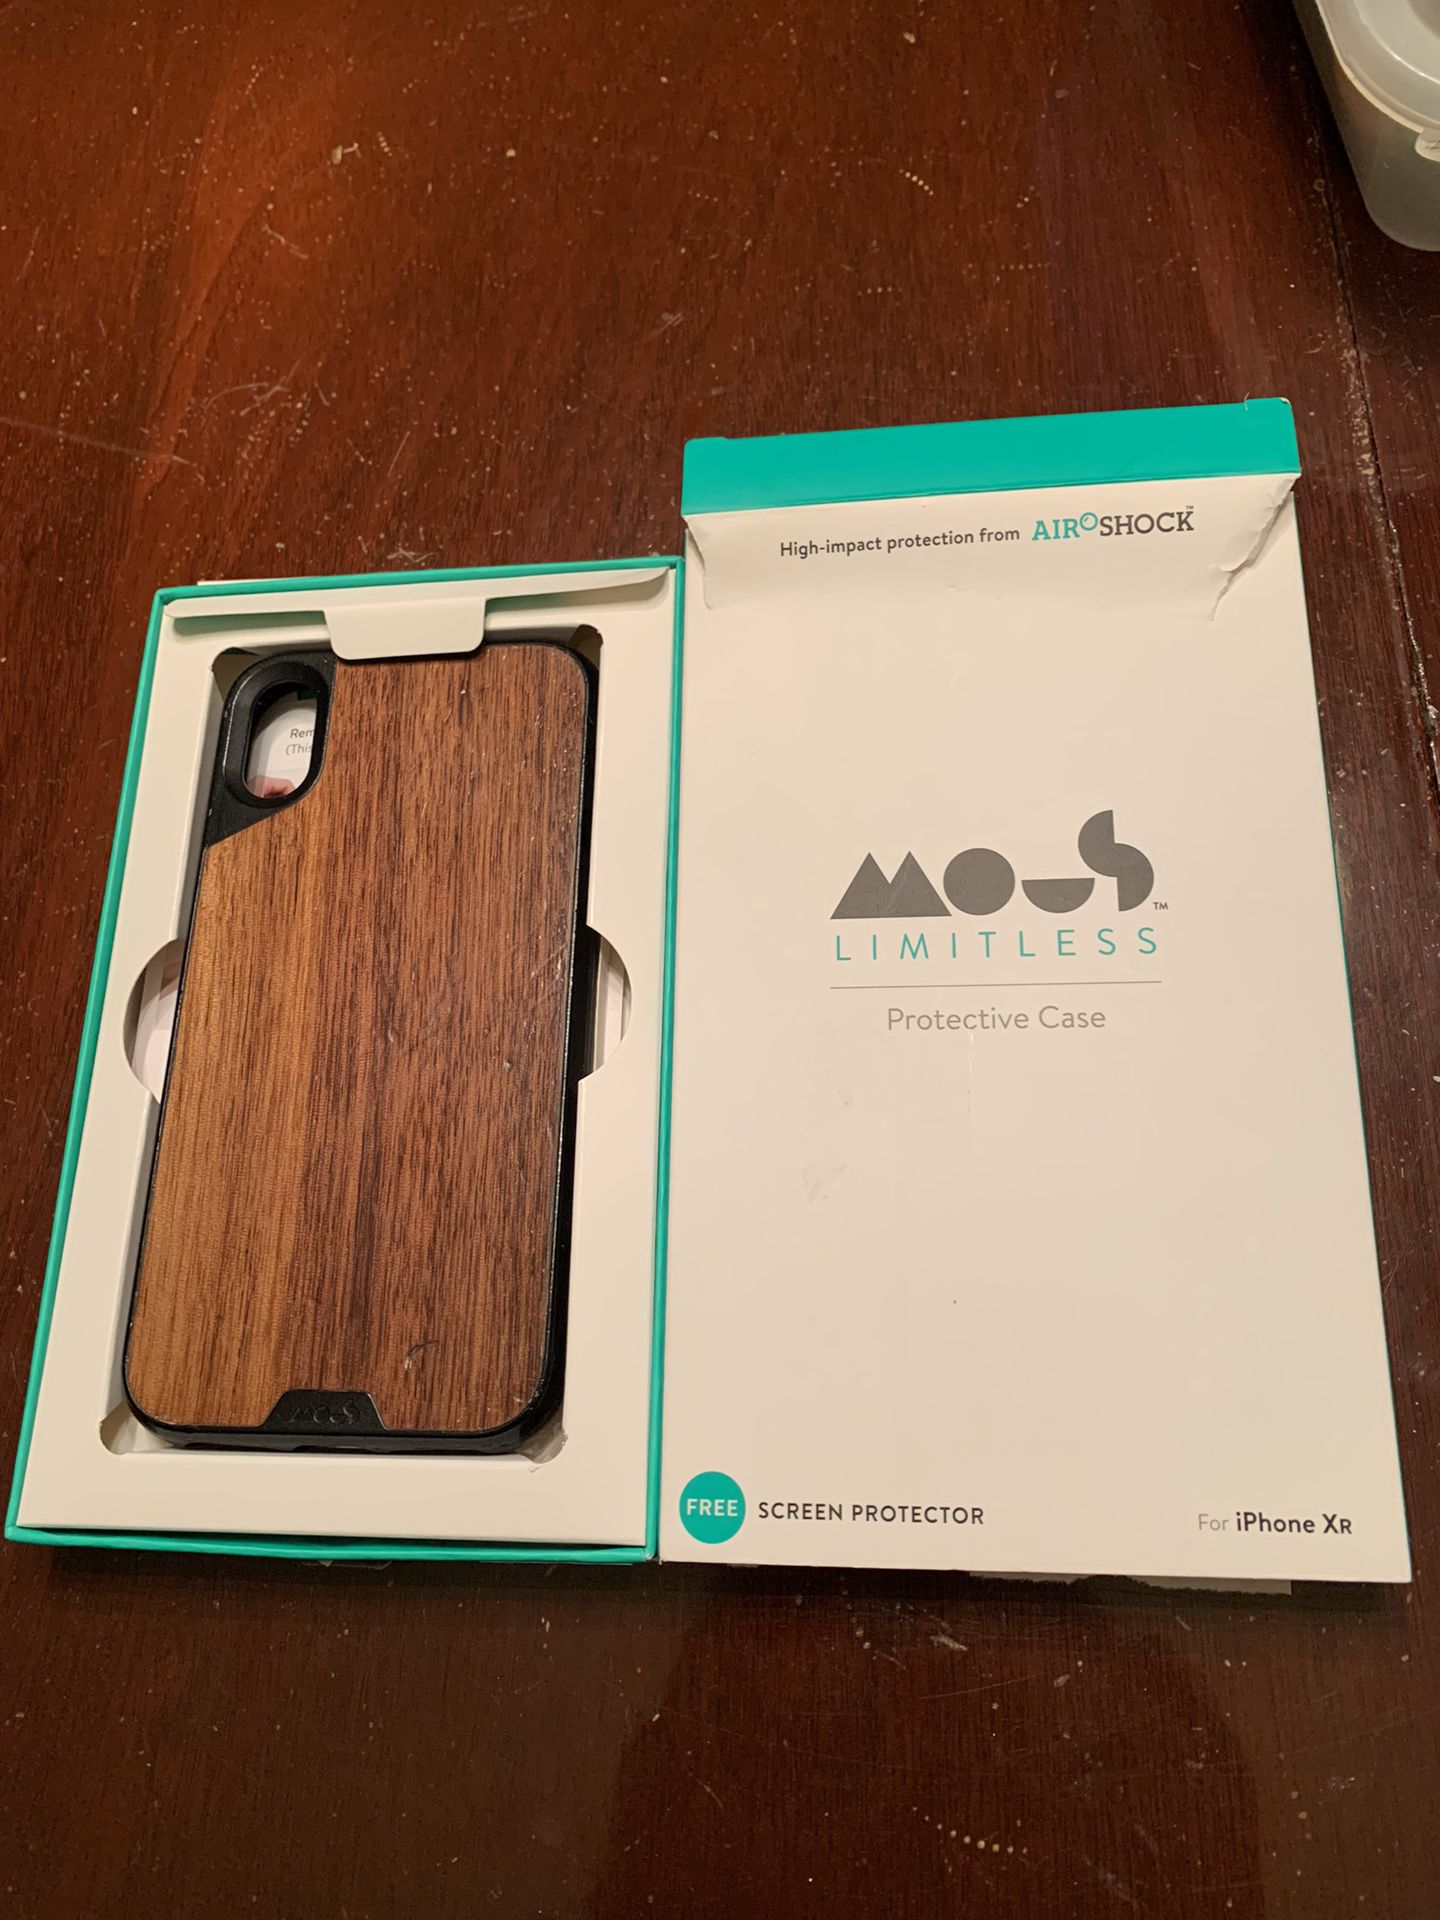 Mous - Protective Case iPhone XR - Limitless 2.0 - Walnut - Screen Protector Included 